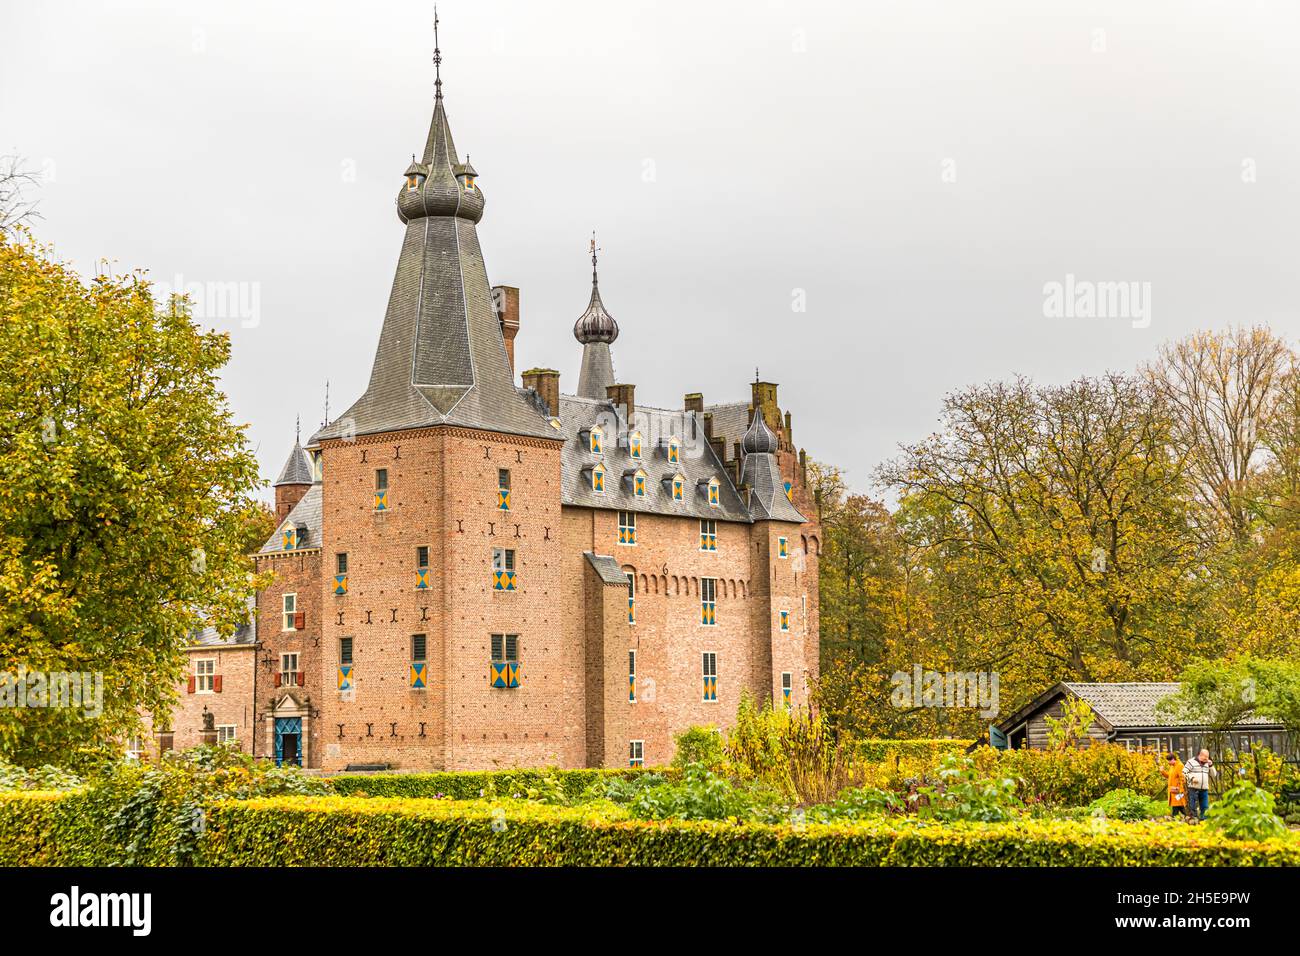 The moated castle Doorwerth houses three museums. Doorwerth, Netherlands Stock Photo